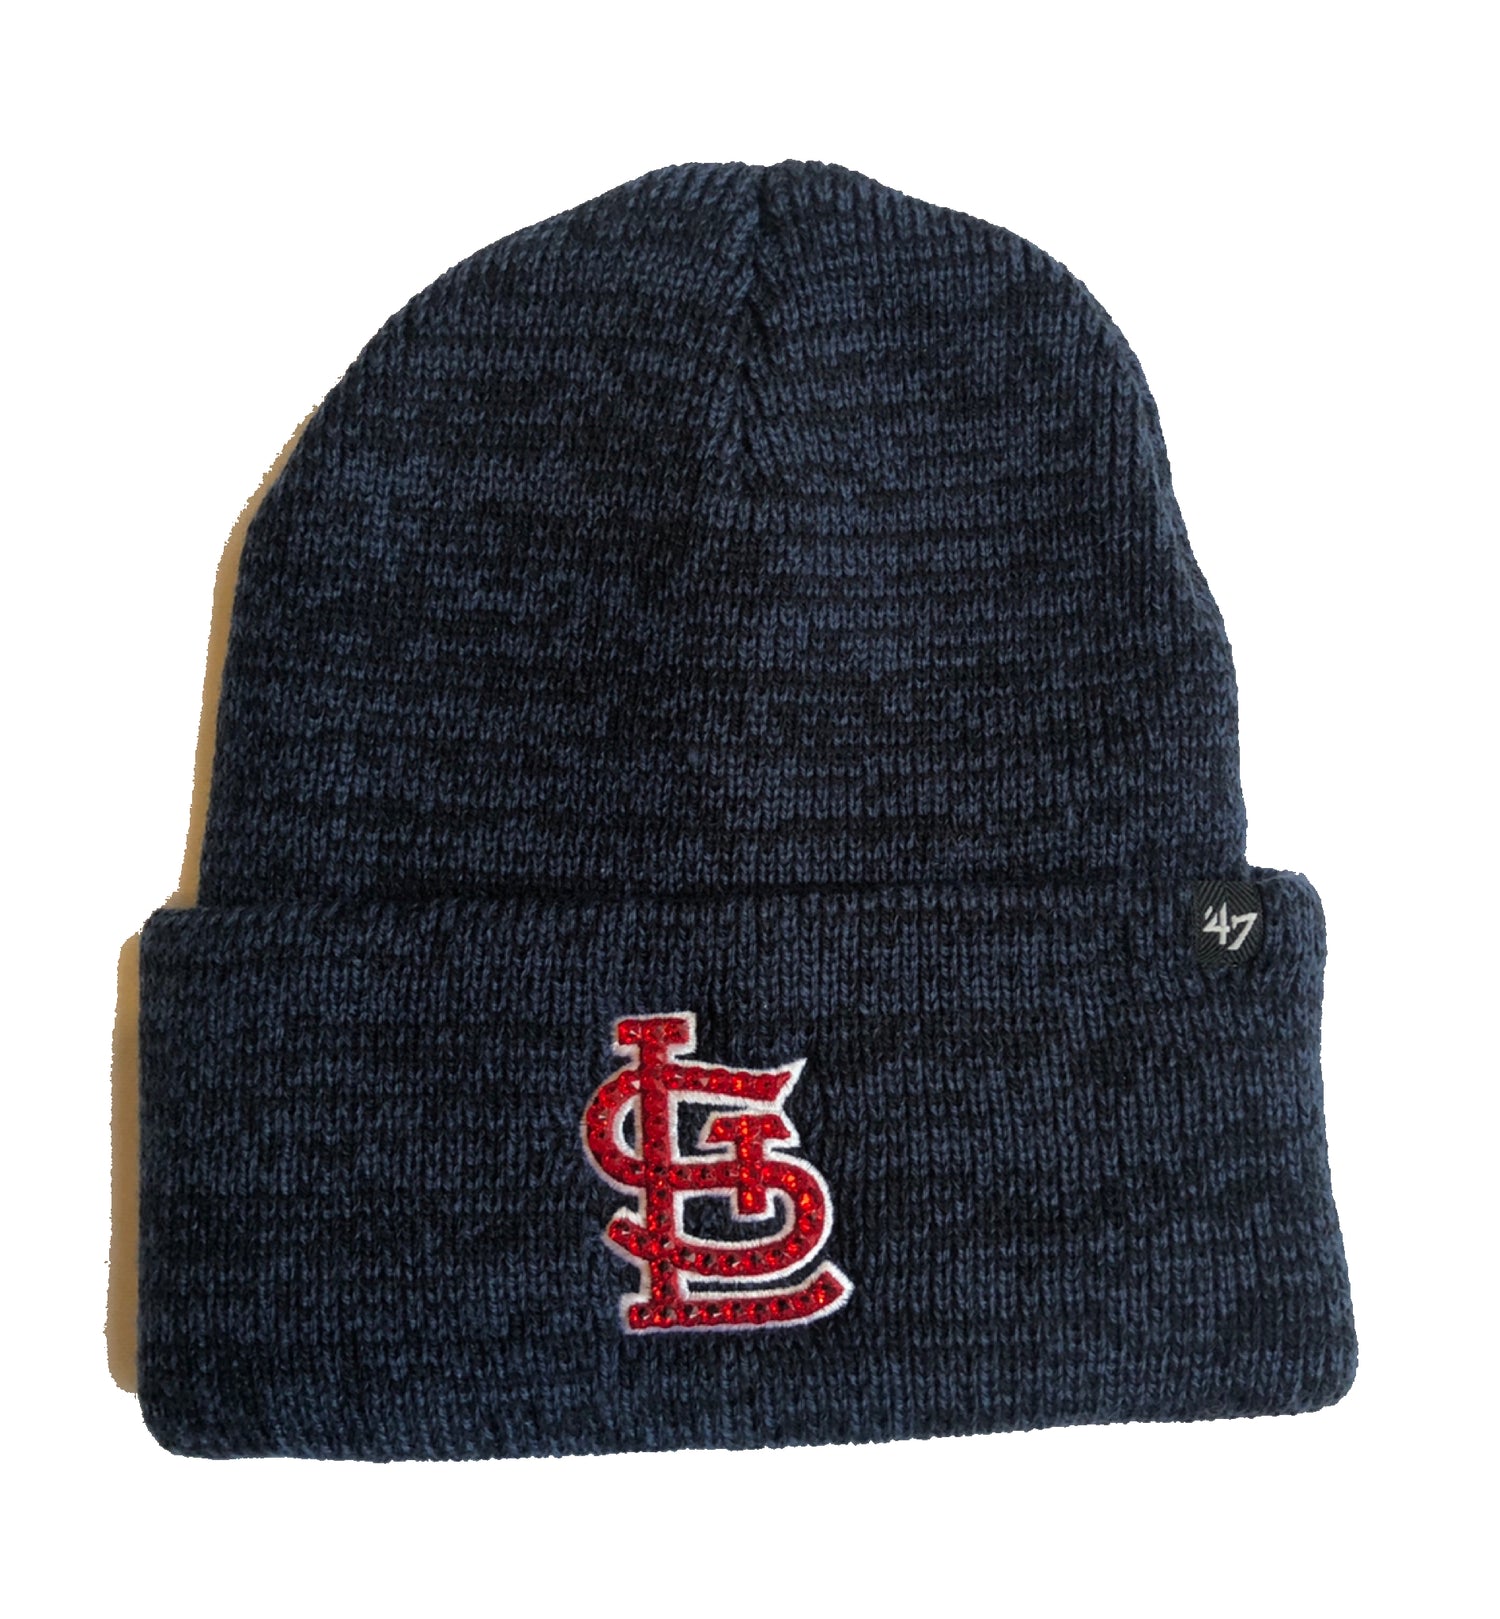 Blinged St. Louis Cardinals Beanie Knit Hat Navy Blue